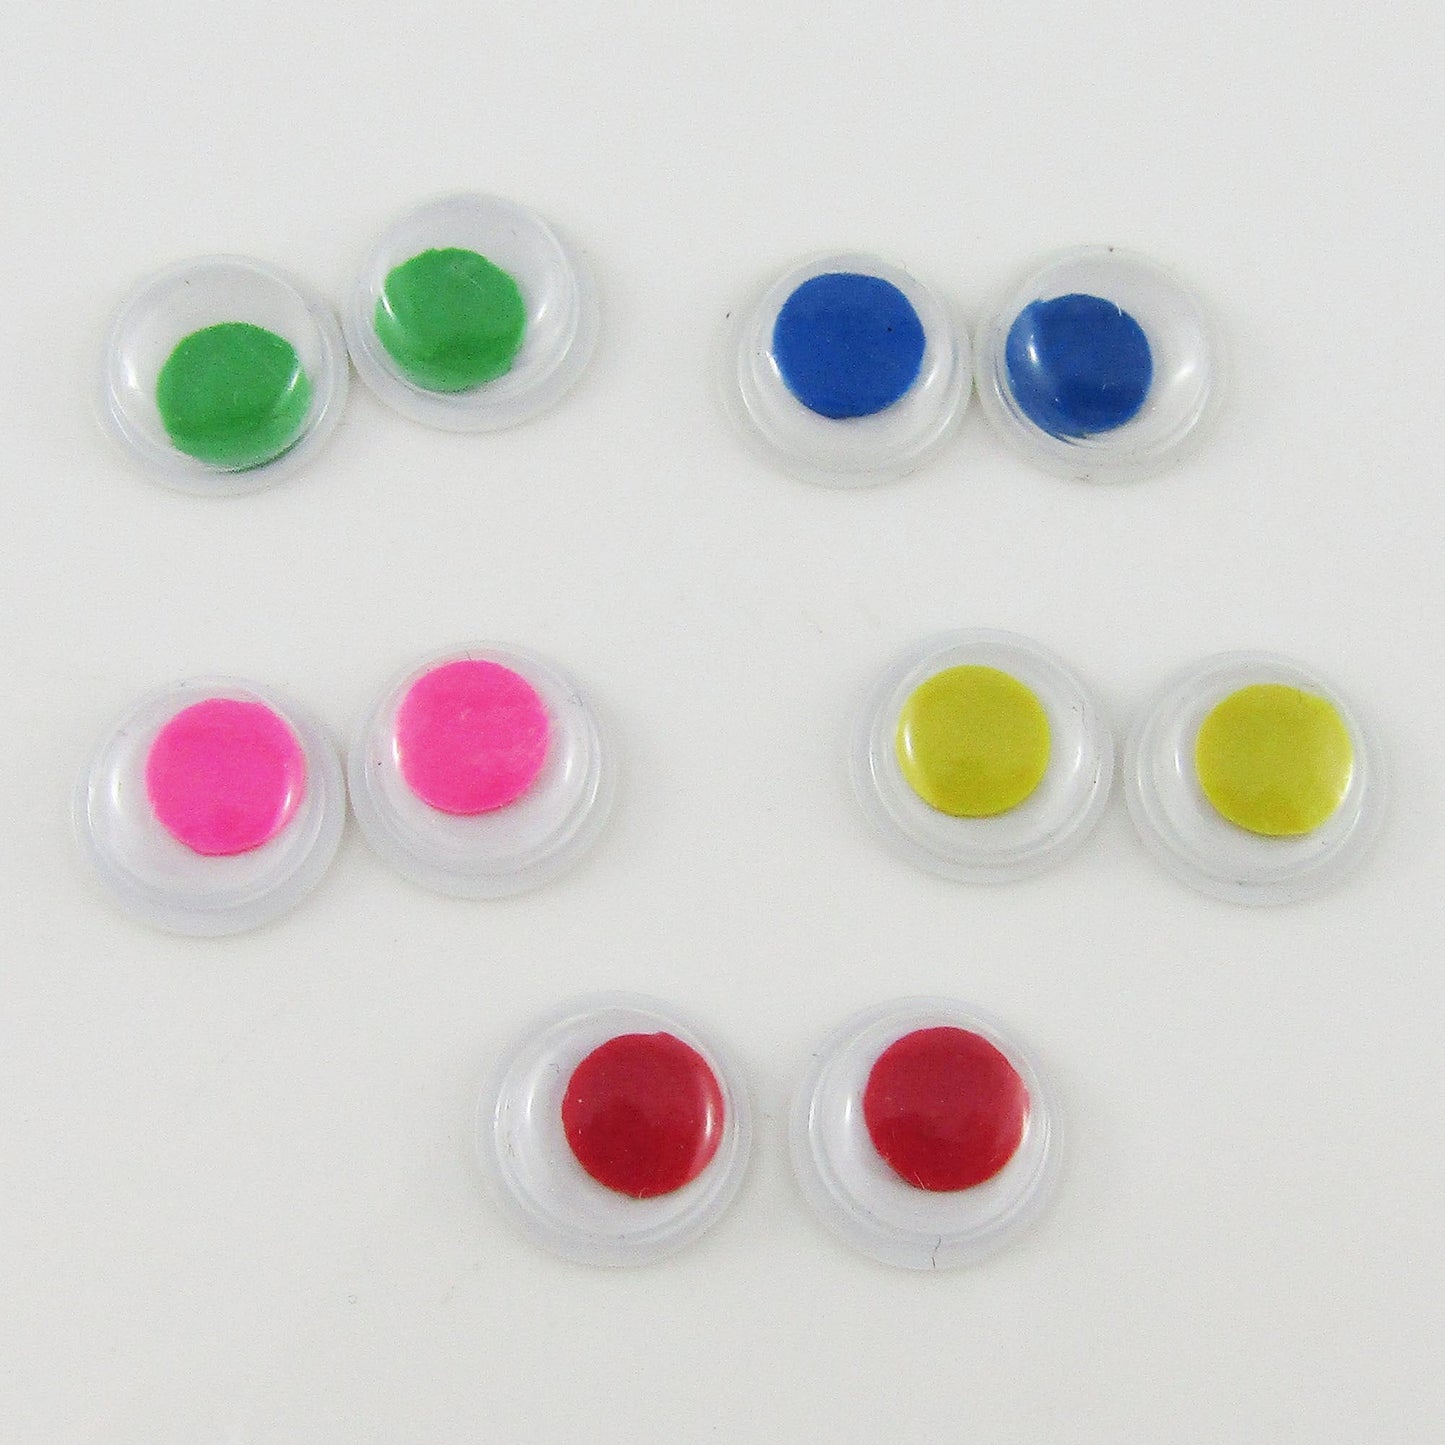 50pcs (25pair)10mm Mixed Coloured Glue on Wiggly Google Eyes Plastic Kids Craft